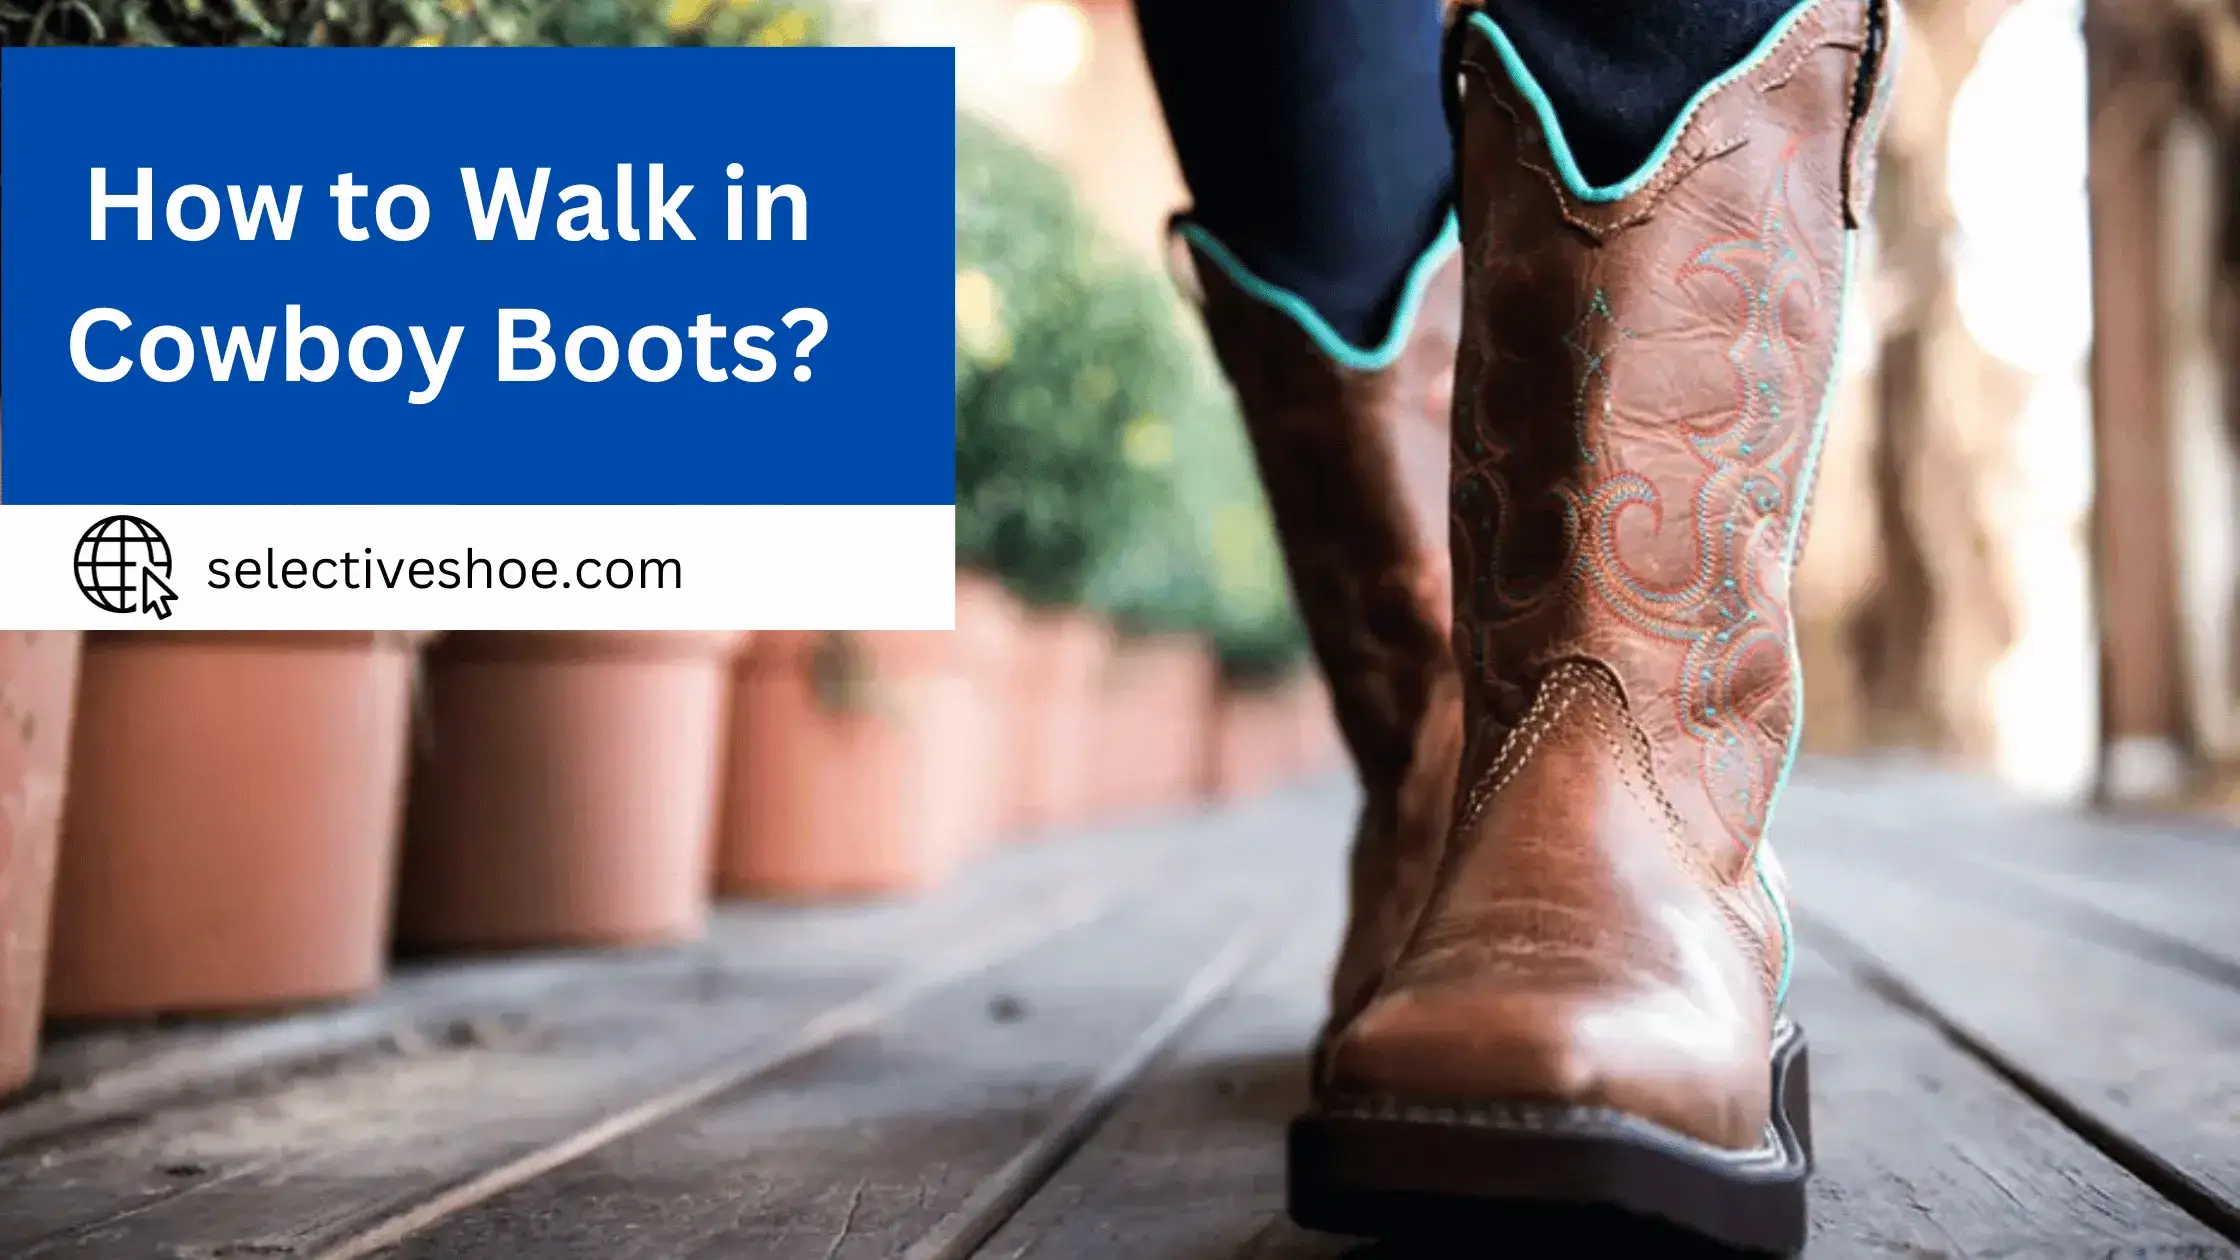 How To Walk In Cowboy Boots? Easy Guide